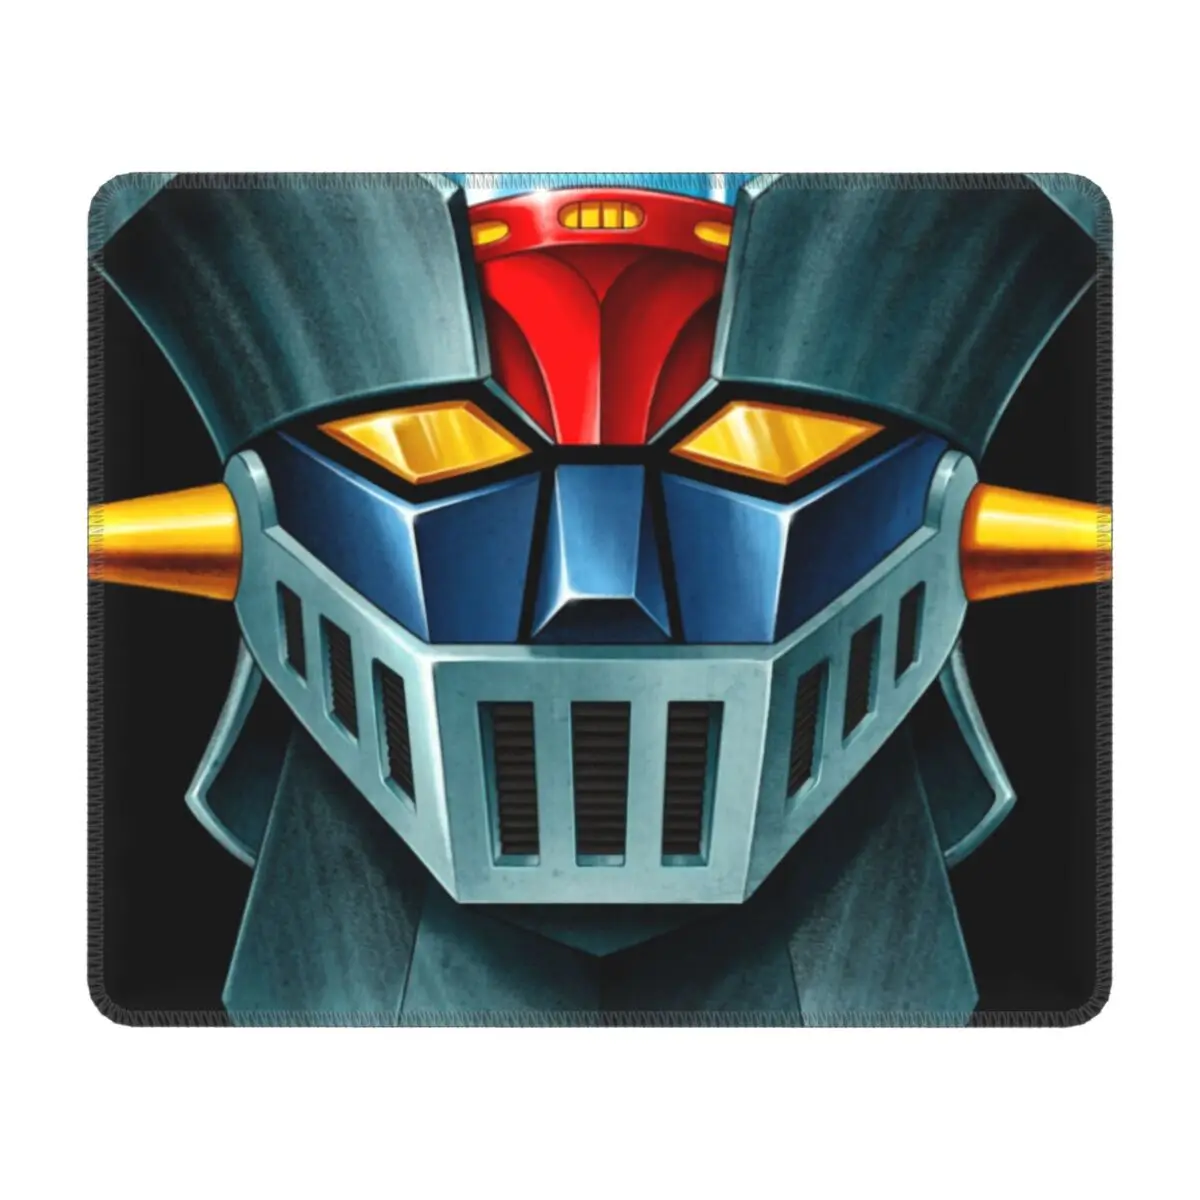 

UFO Robot Mazinger Z Laptop Mouse Pad Square Mousepad with Stitched Edges Non-Slip Rubber Desk Mecha Anime Mat Pads for Gaming